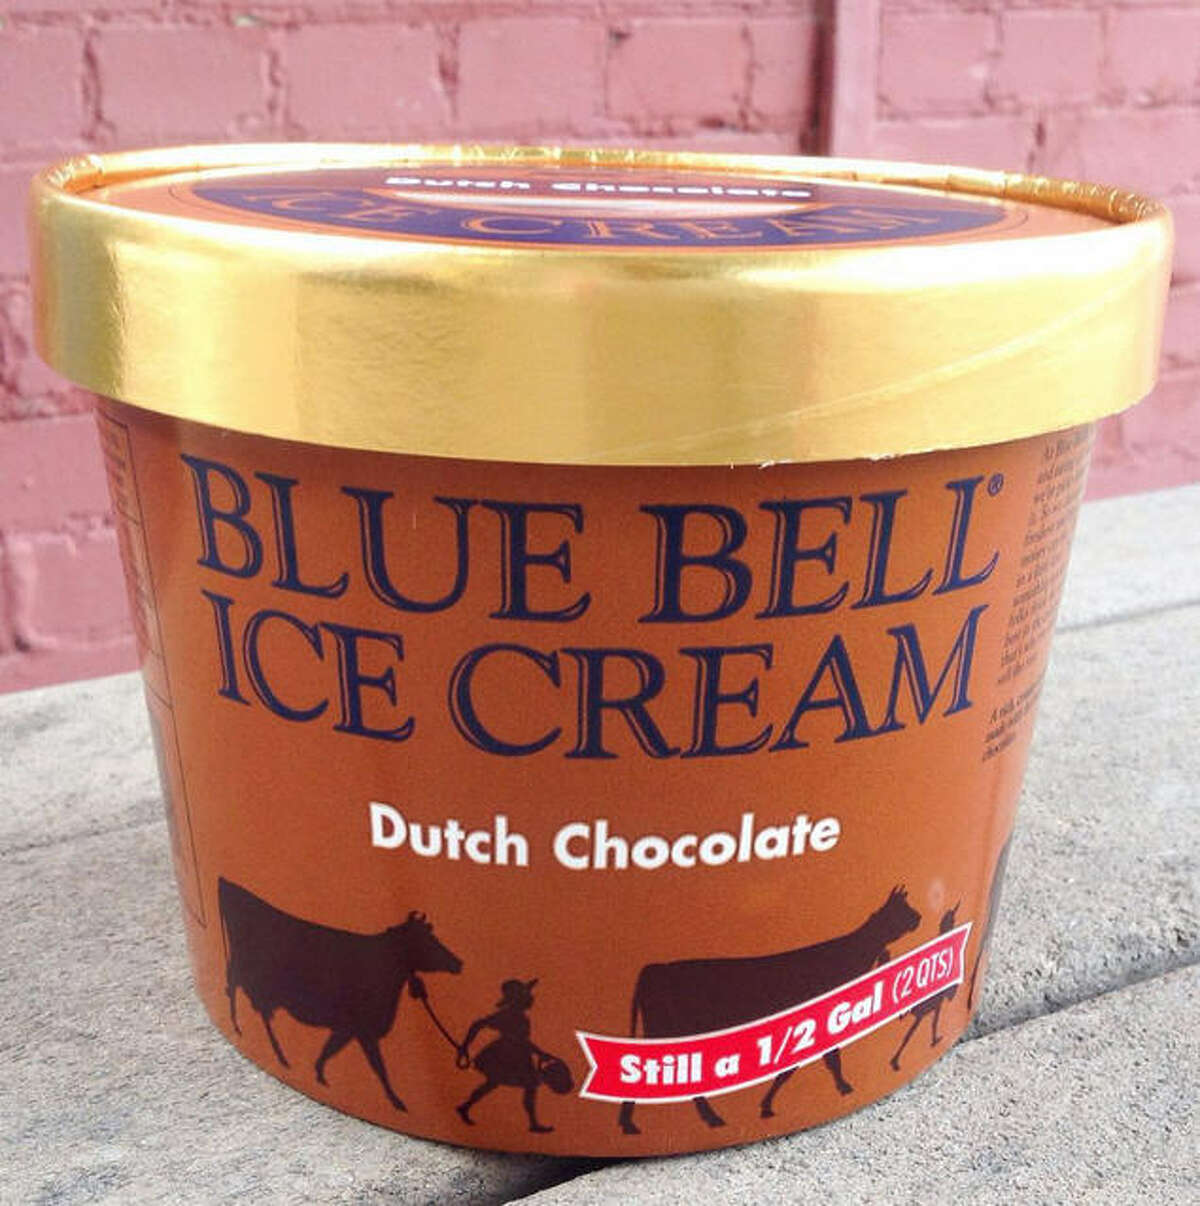 Blue Bell announced bia its Instagram page on Tuesday that Dutch Chocolate would be its second flavor to return to stores following the early 2015 listeria outbreak. PHOTOS: The internet responds to the return of Blue Bell ...